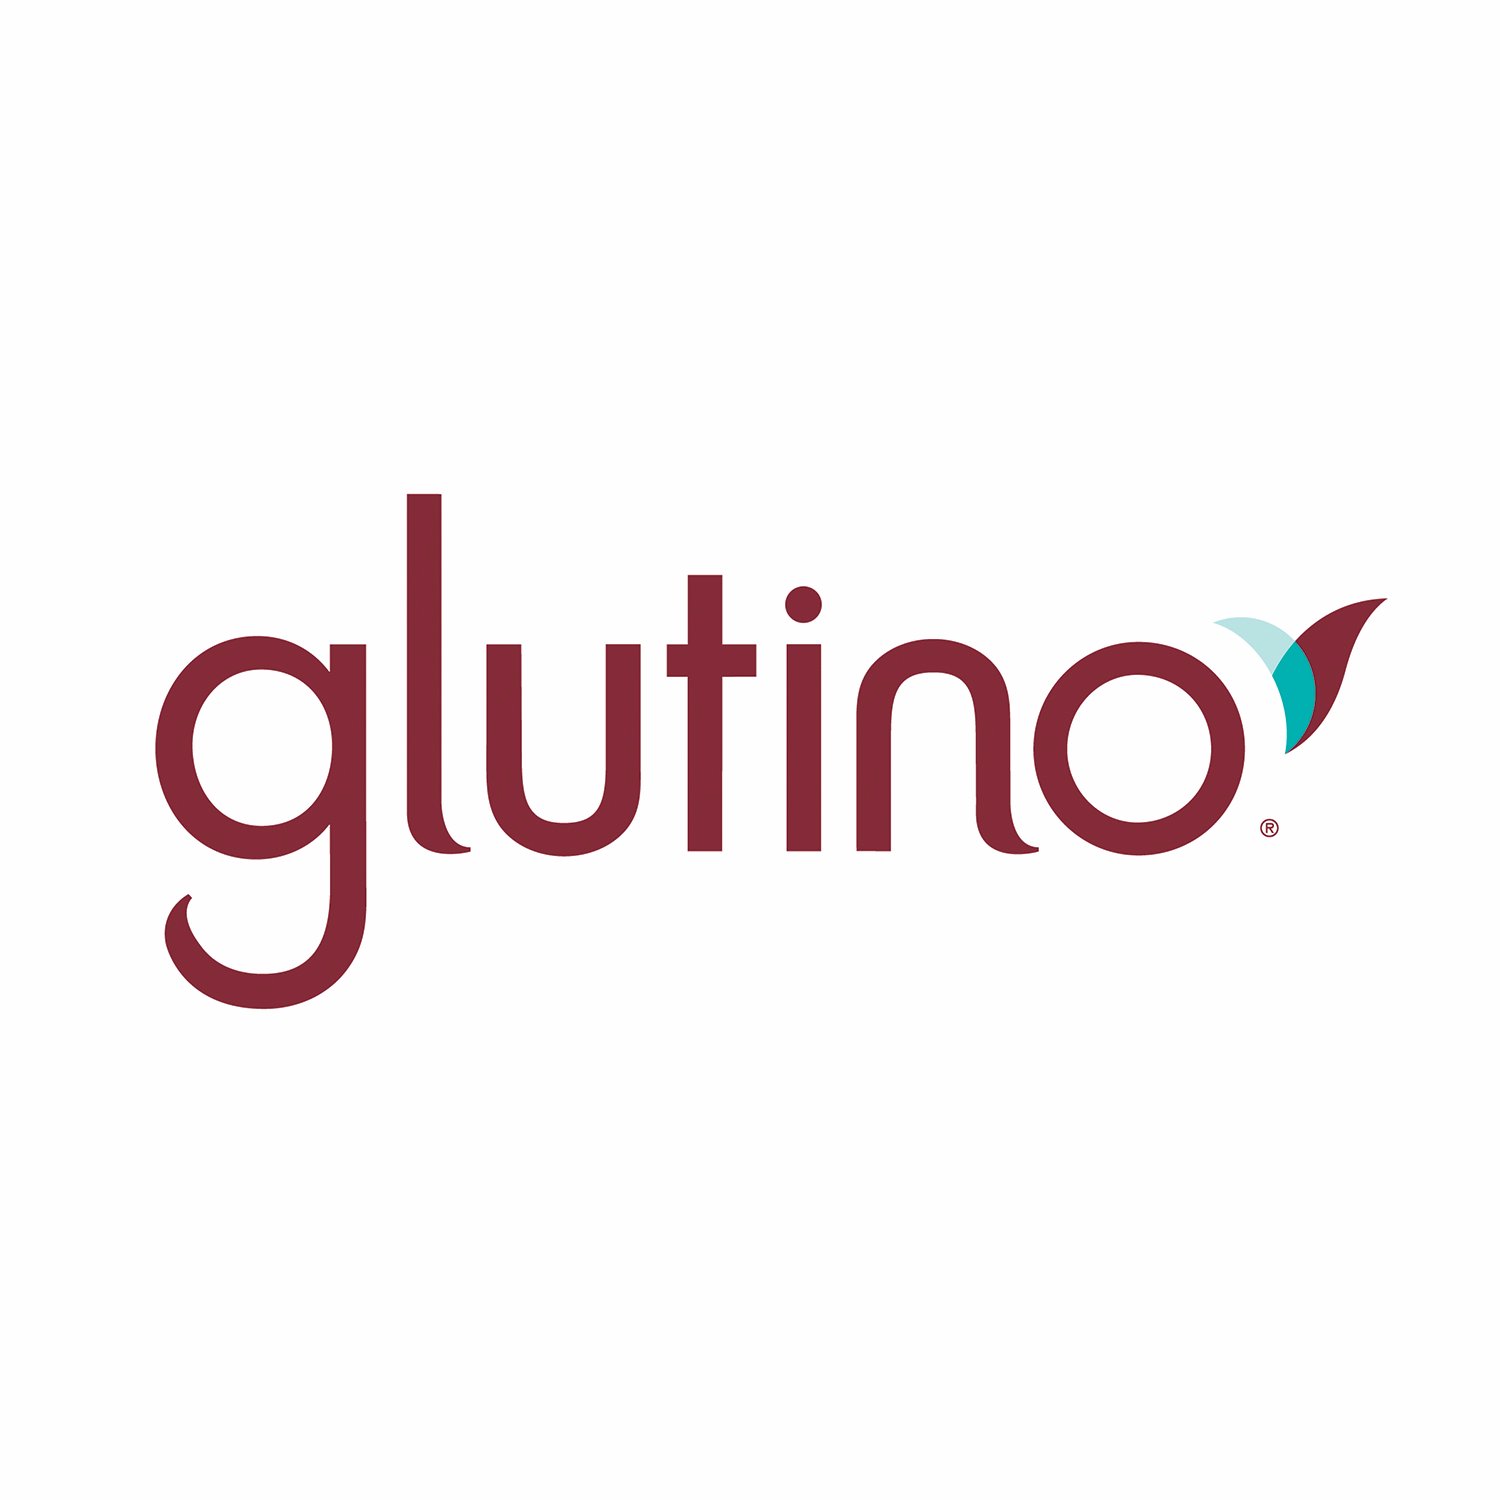 Please follow our offical account @GlutinoFoods for more brand recipes, products, and news!